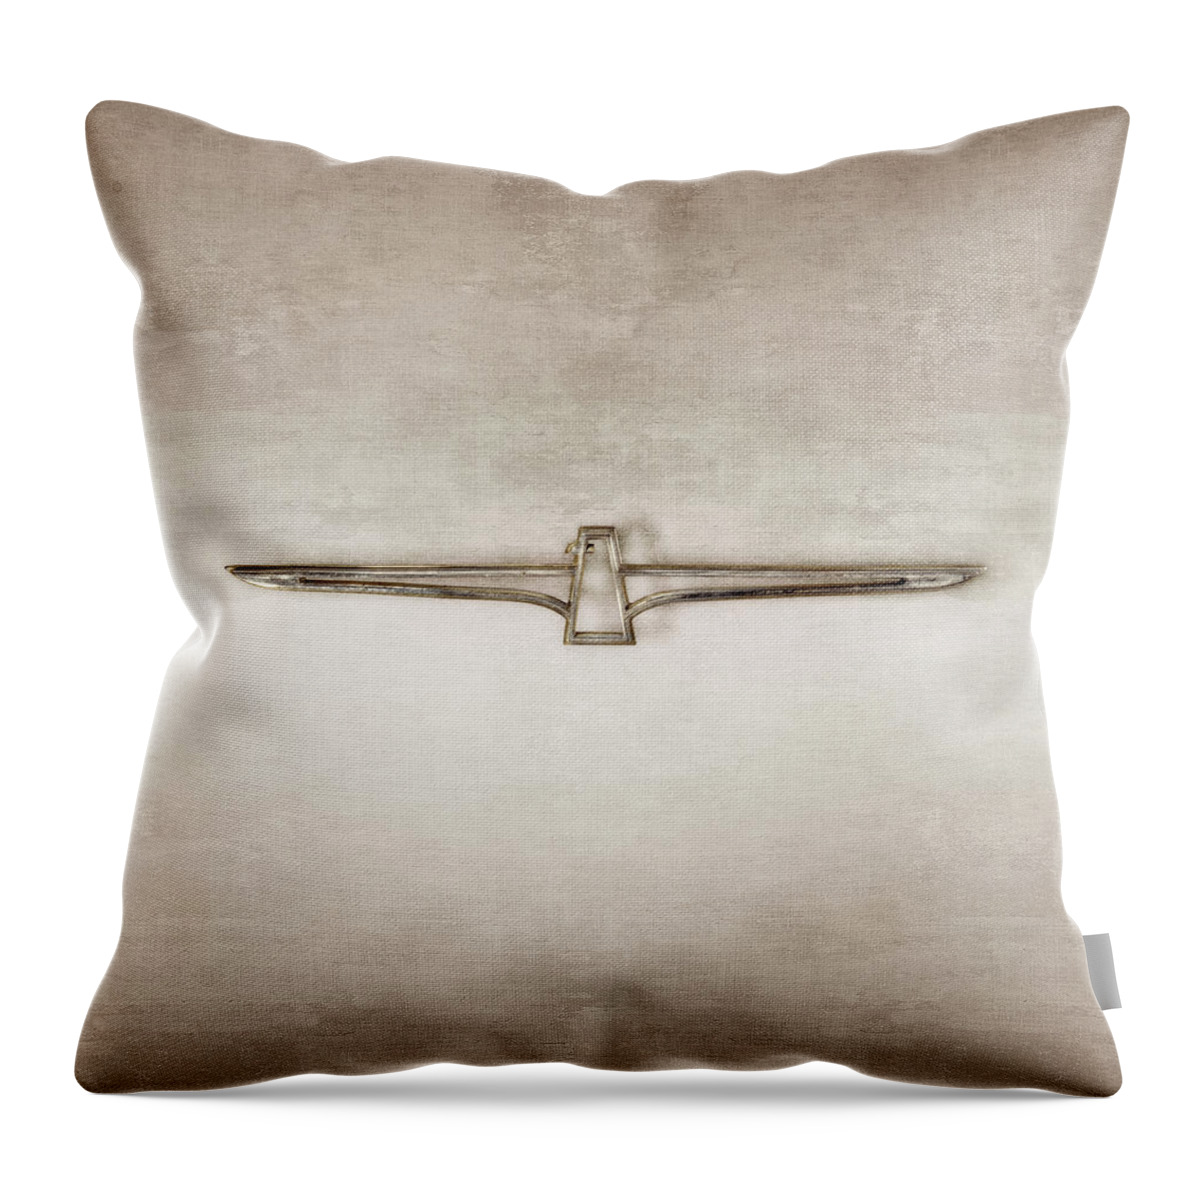 Automotive Throw Pillow featuring the photograph Ford Thunderbird Emblem by YoPedro